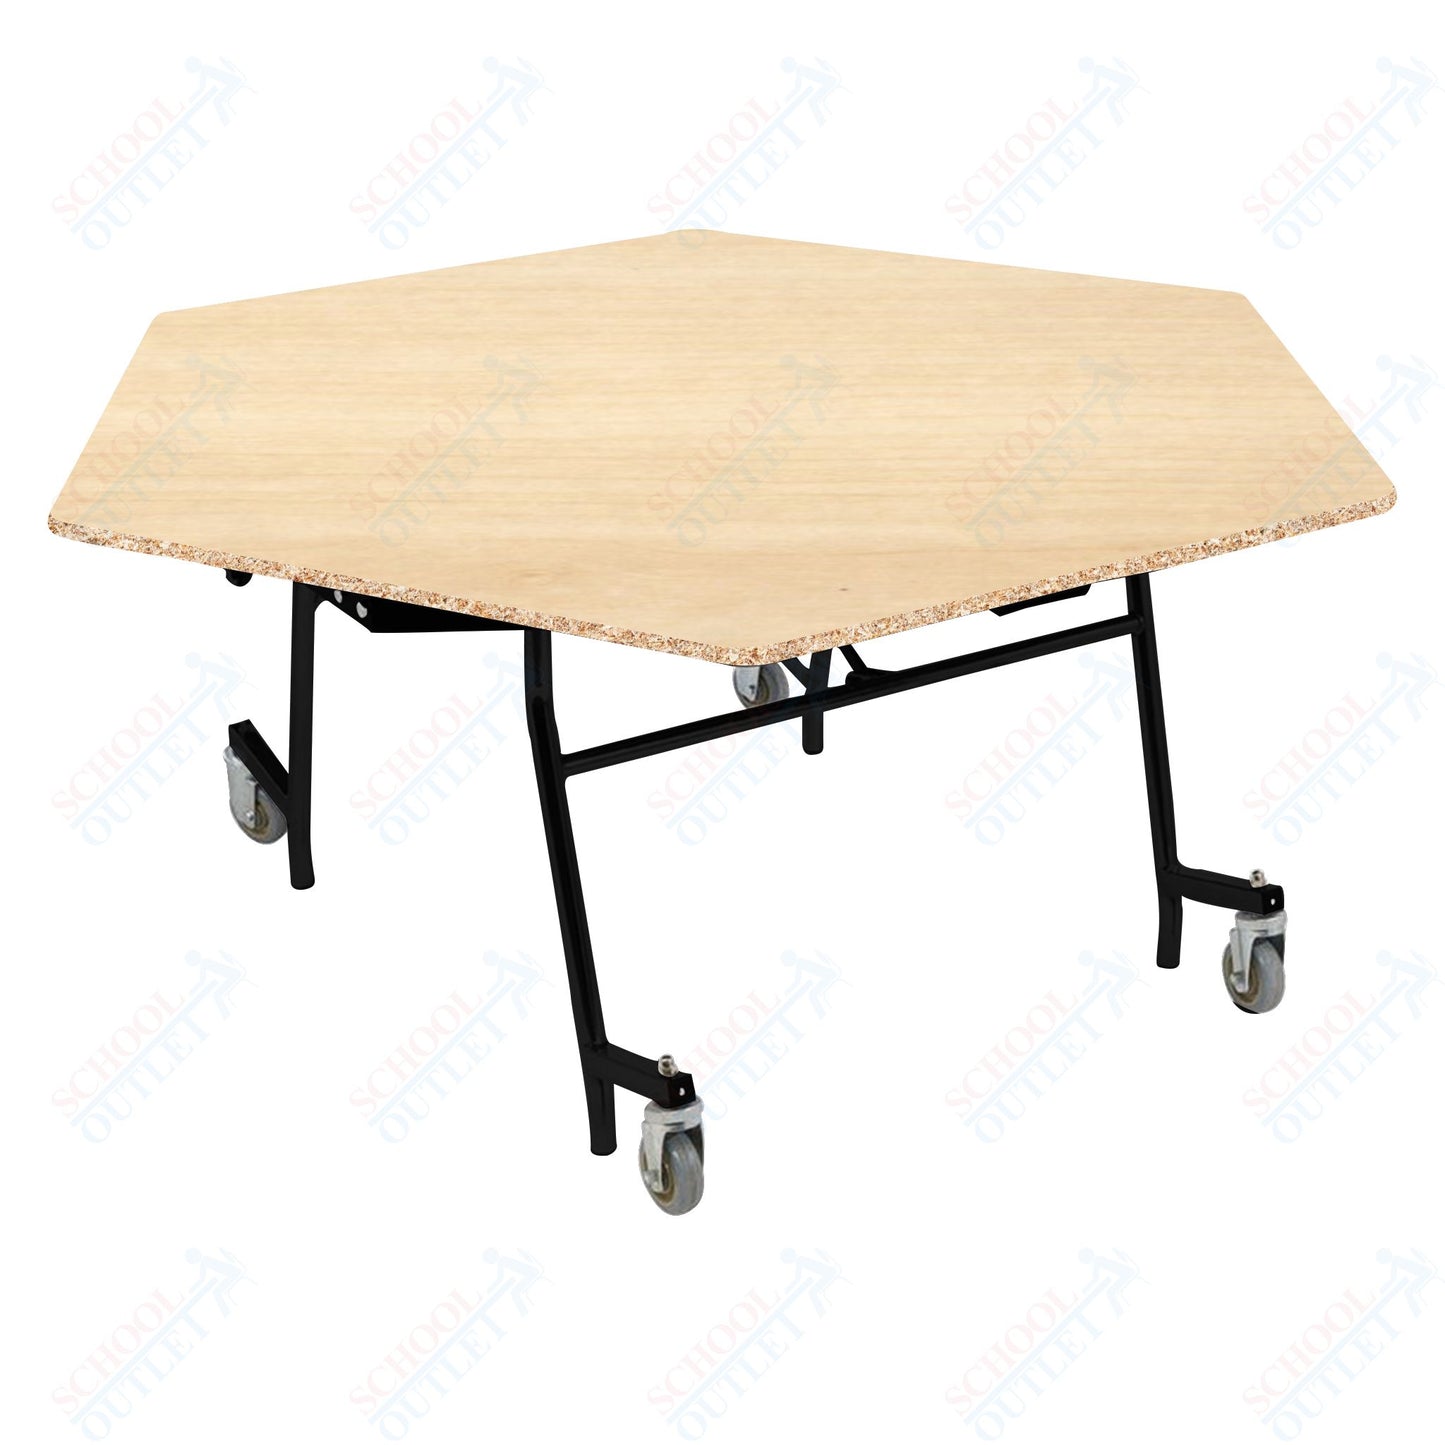 NPS EasyFold 60" Hexagon Table (National Public Seating NPS-MTSSF-60H)